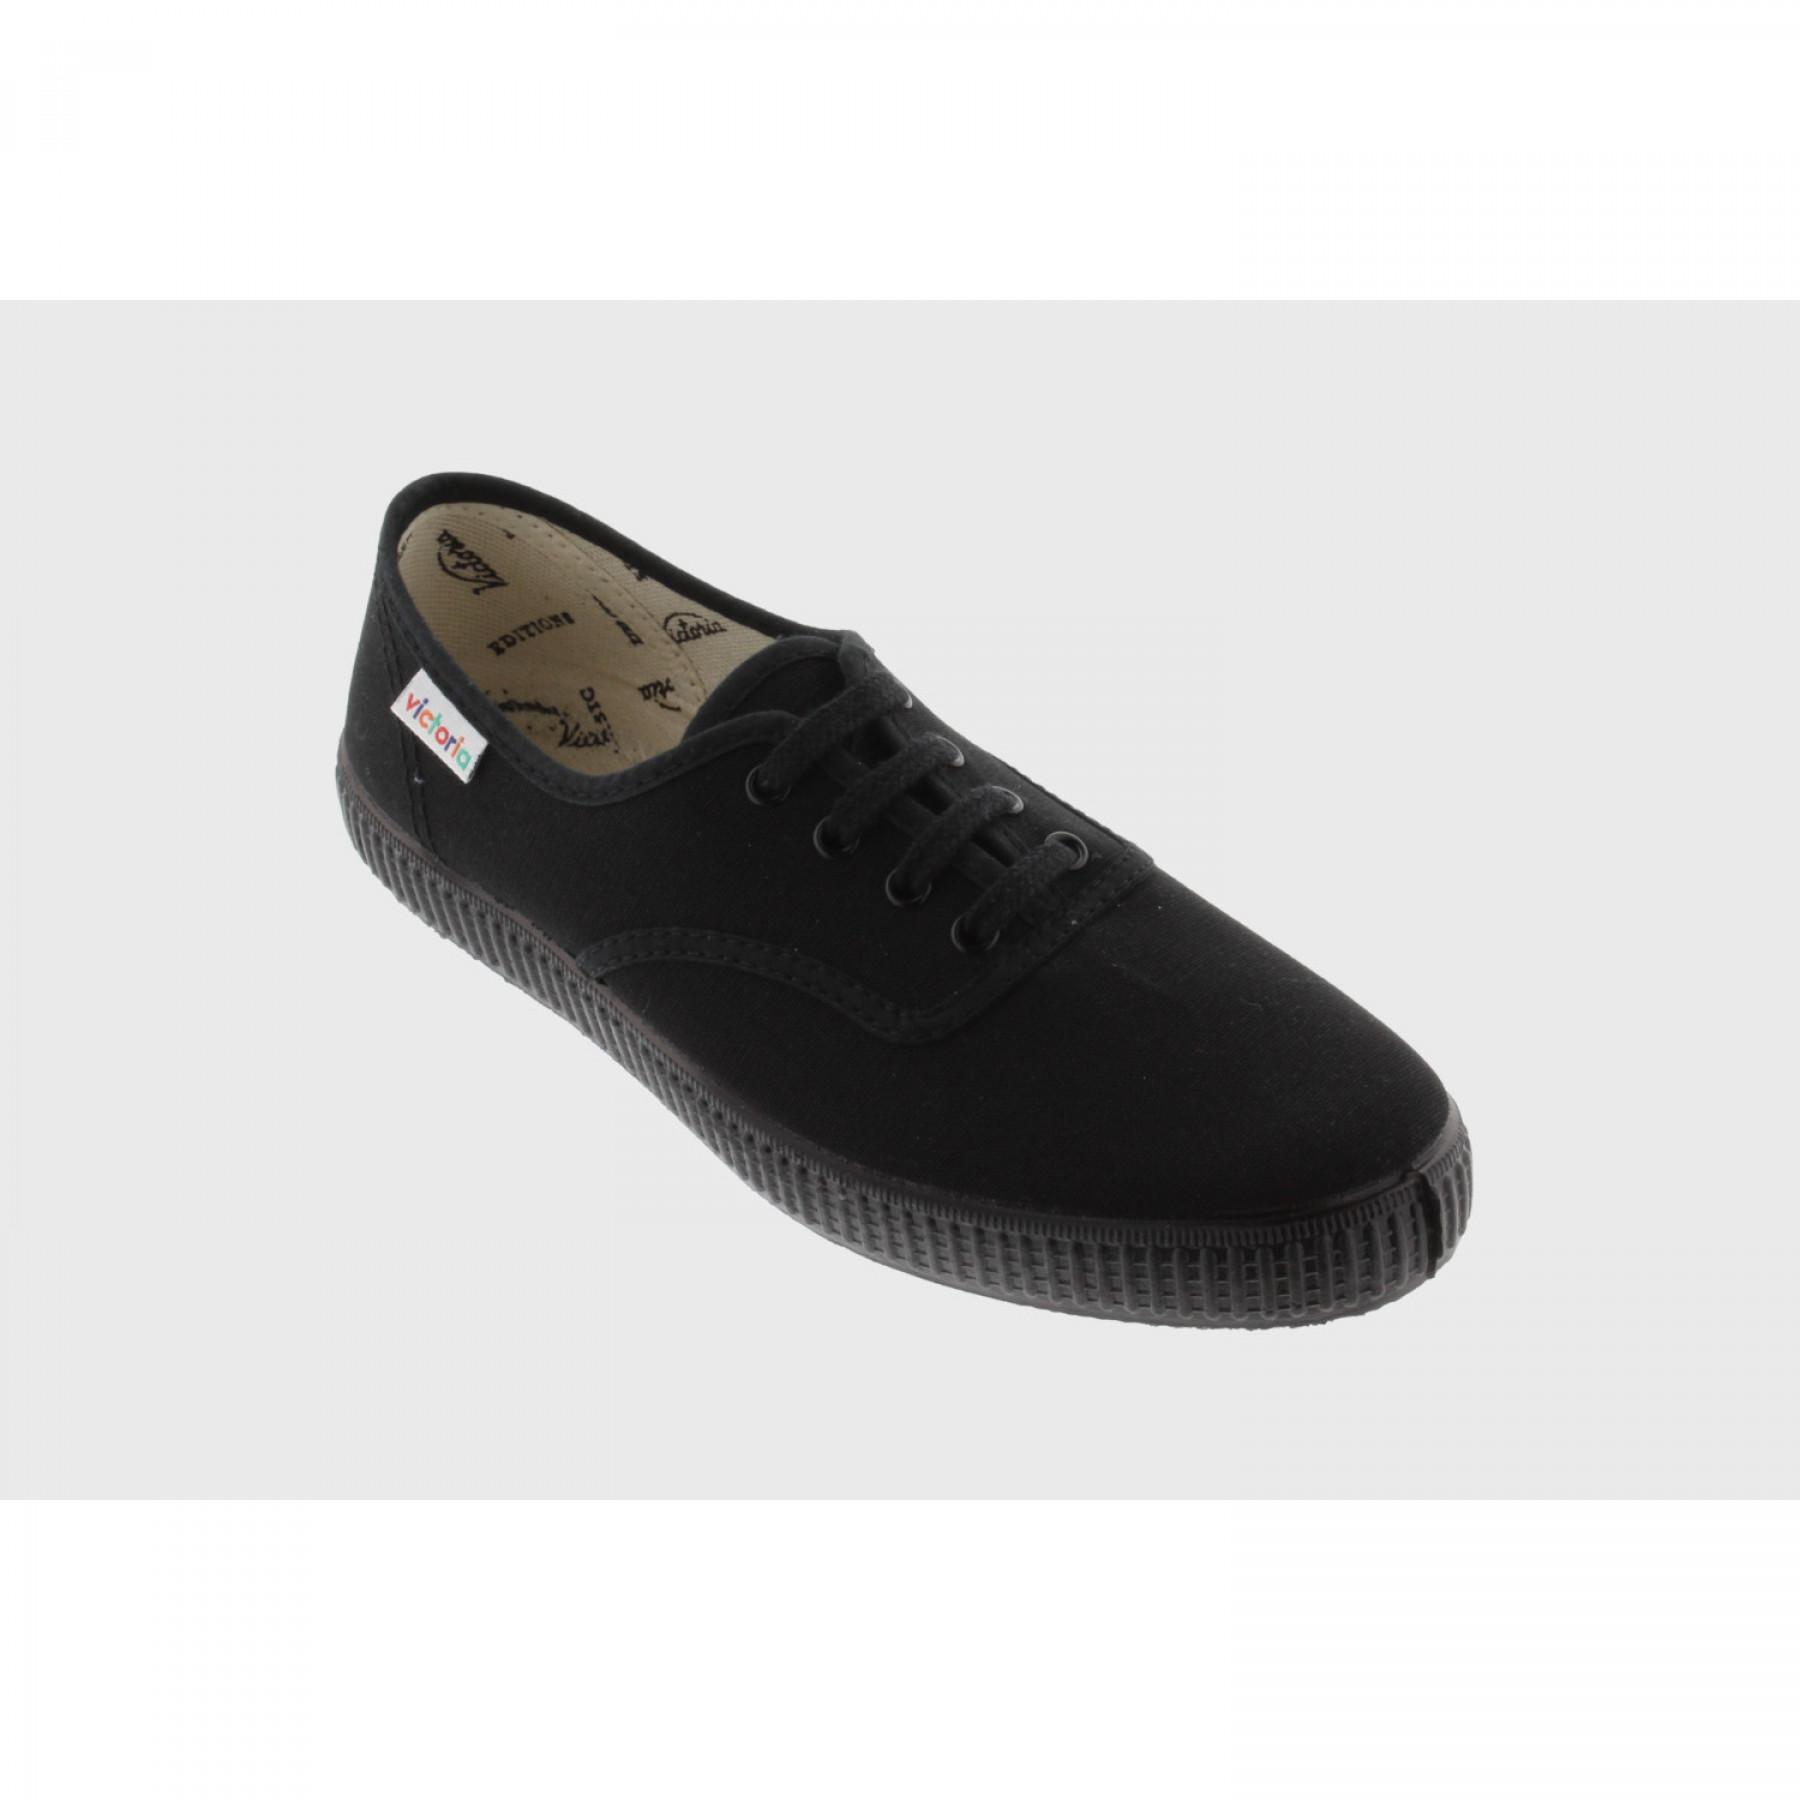 Sneaker Victoria 1915 anglaise total black